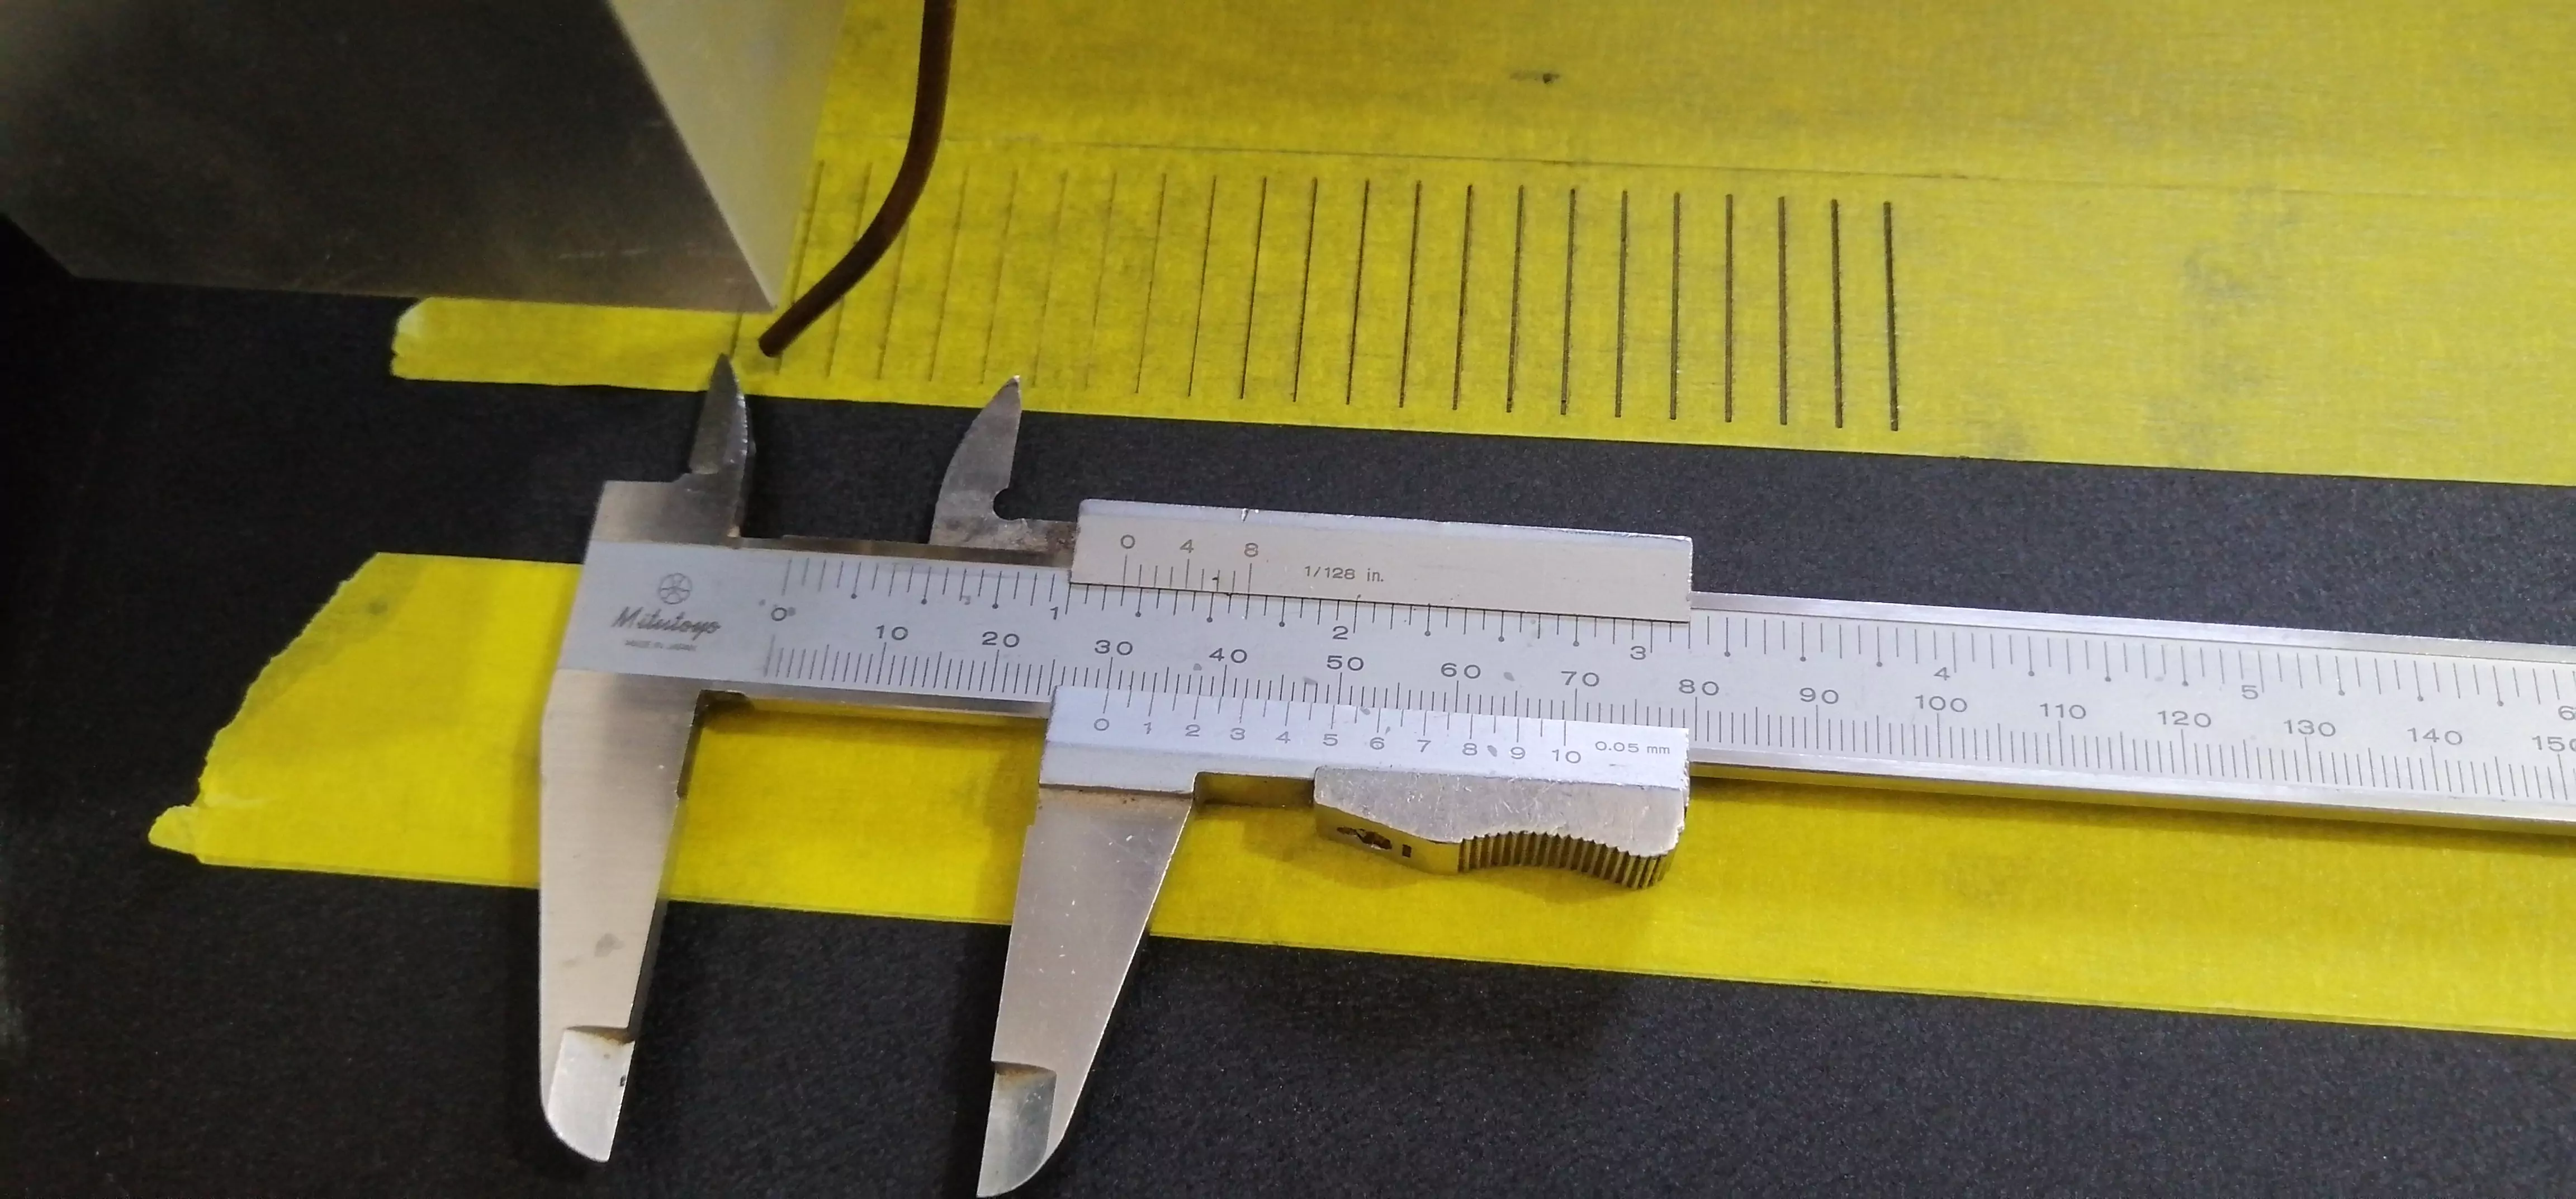 Laser cutting of a Masking tape stencil with a diode laser